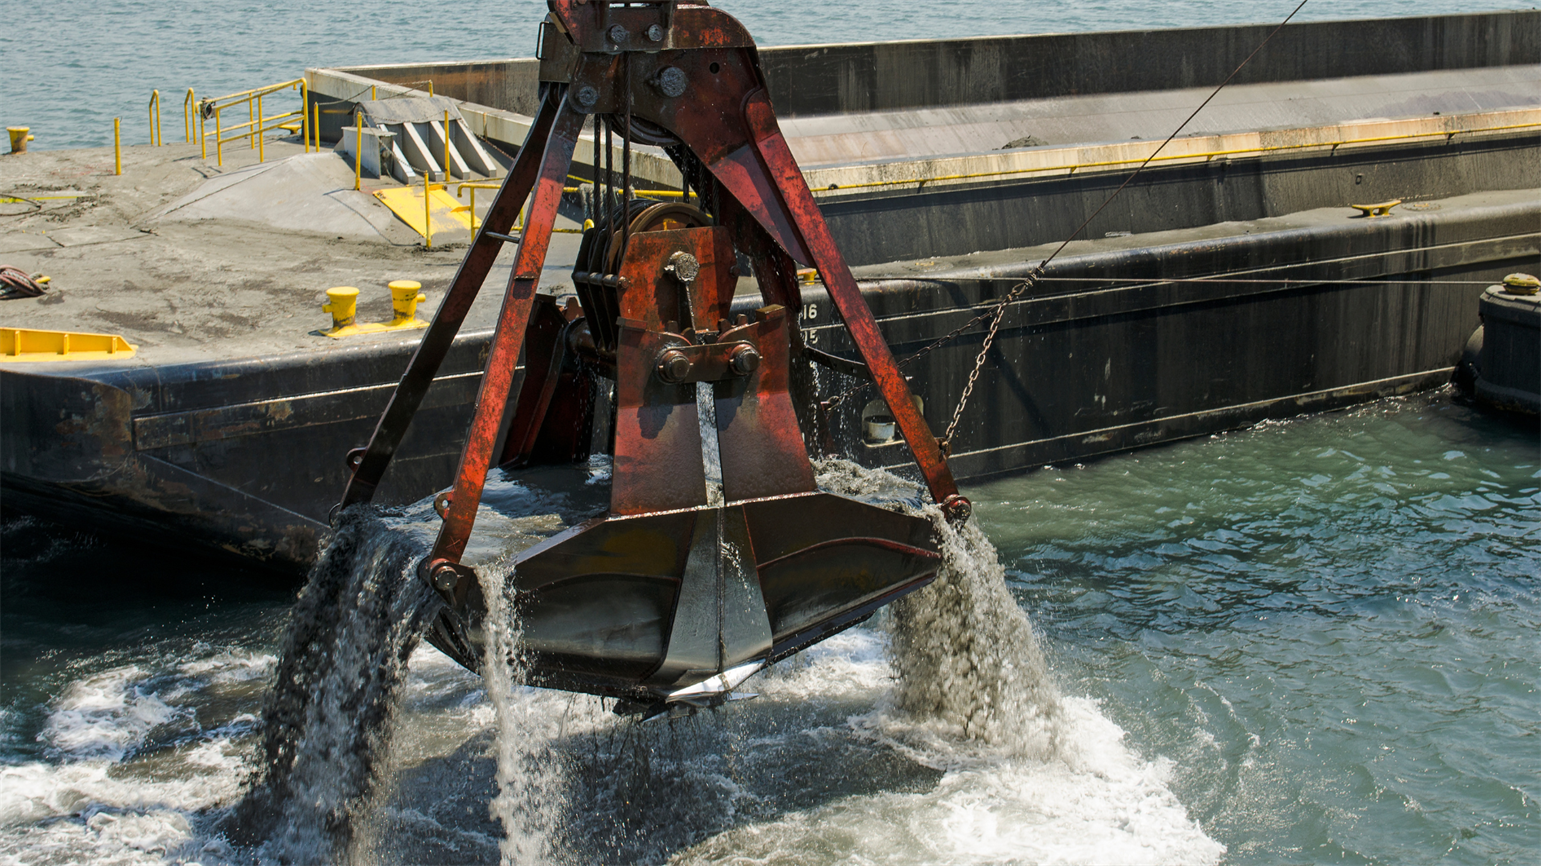 Dredging &amp;mdash; the removal of sediment from water &amp;mdash; allows ships to travel safely and efficiently. Illinois&amp;rsquo; marine transportation system, which connects the state to the Atlantic Ocean and Gulf of Mexico, is responsible for transporting 90.6 million tons of goods per year, according to the Illinois Department of Transportation.